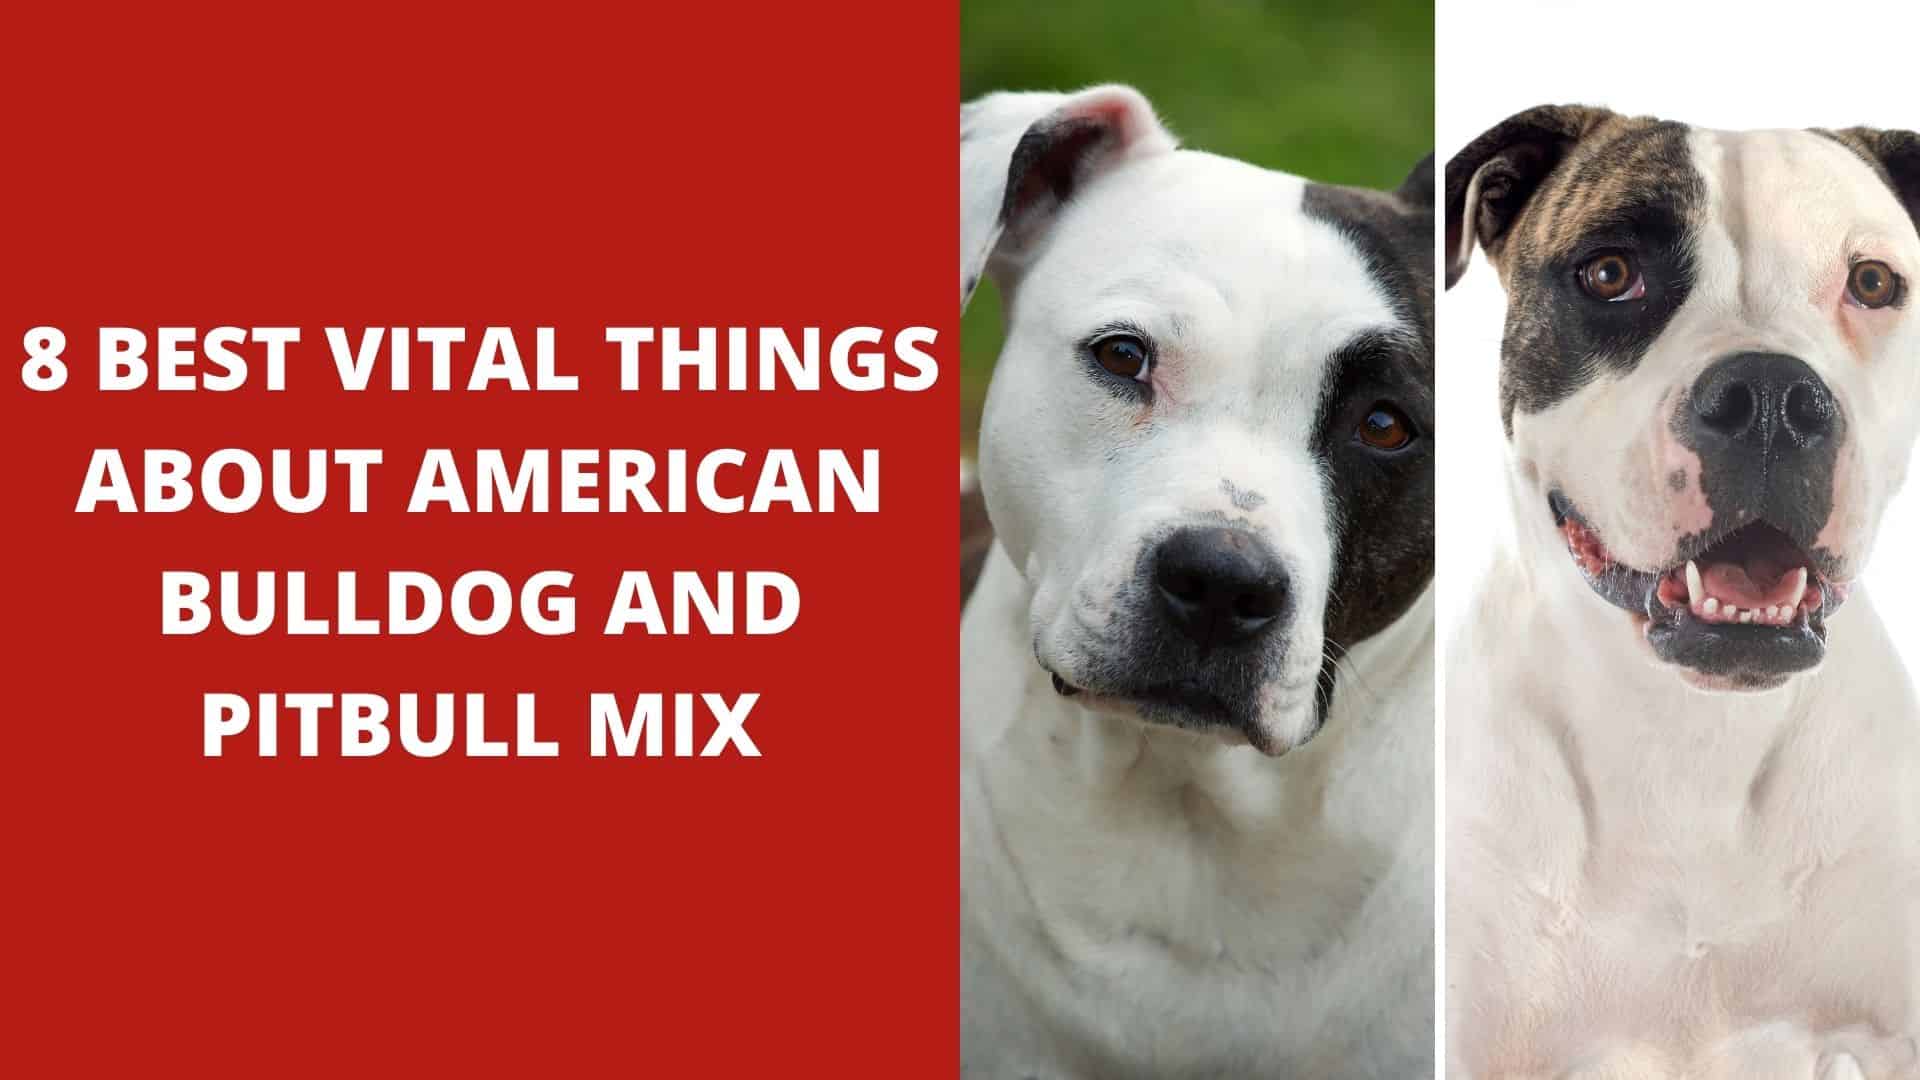 8 Best Vital Things About American Bulldog and Pitbull Mix